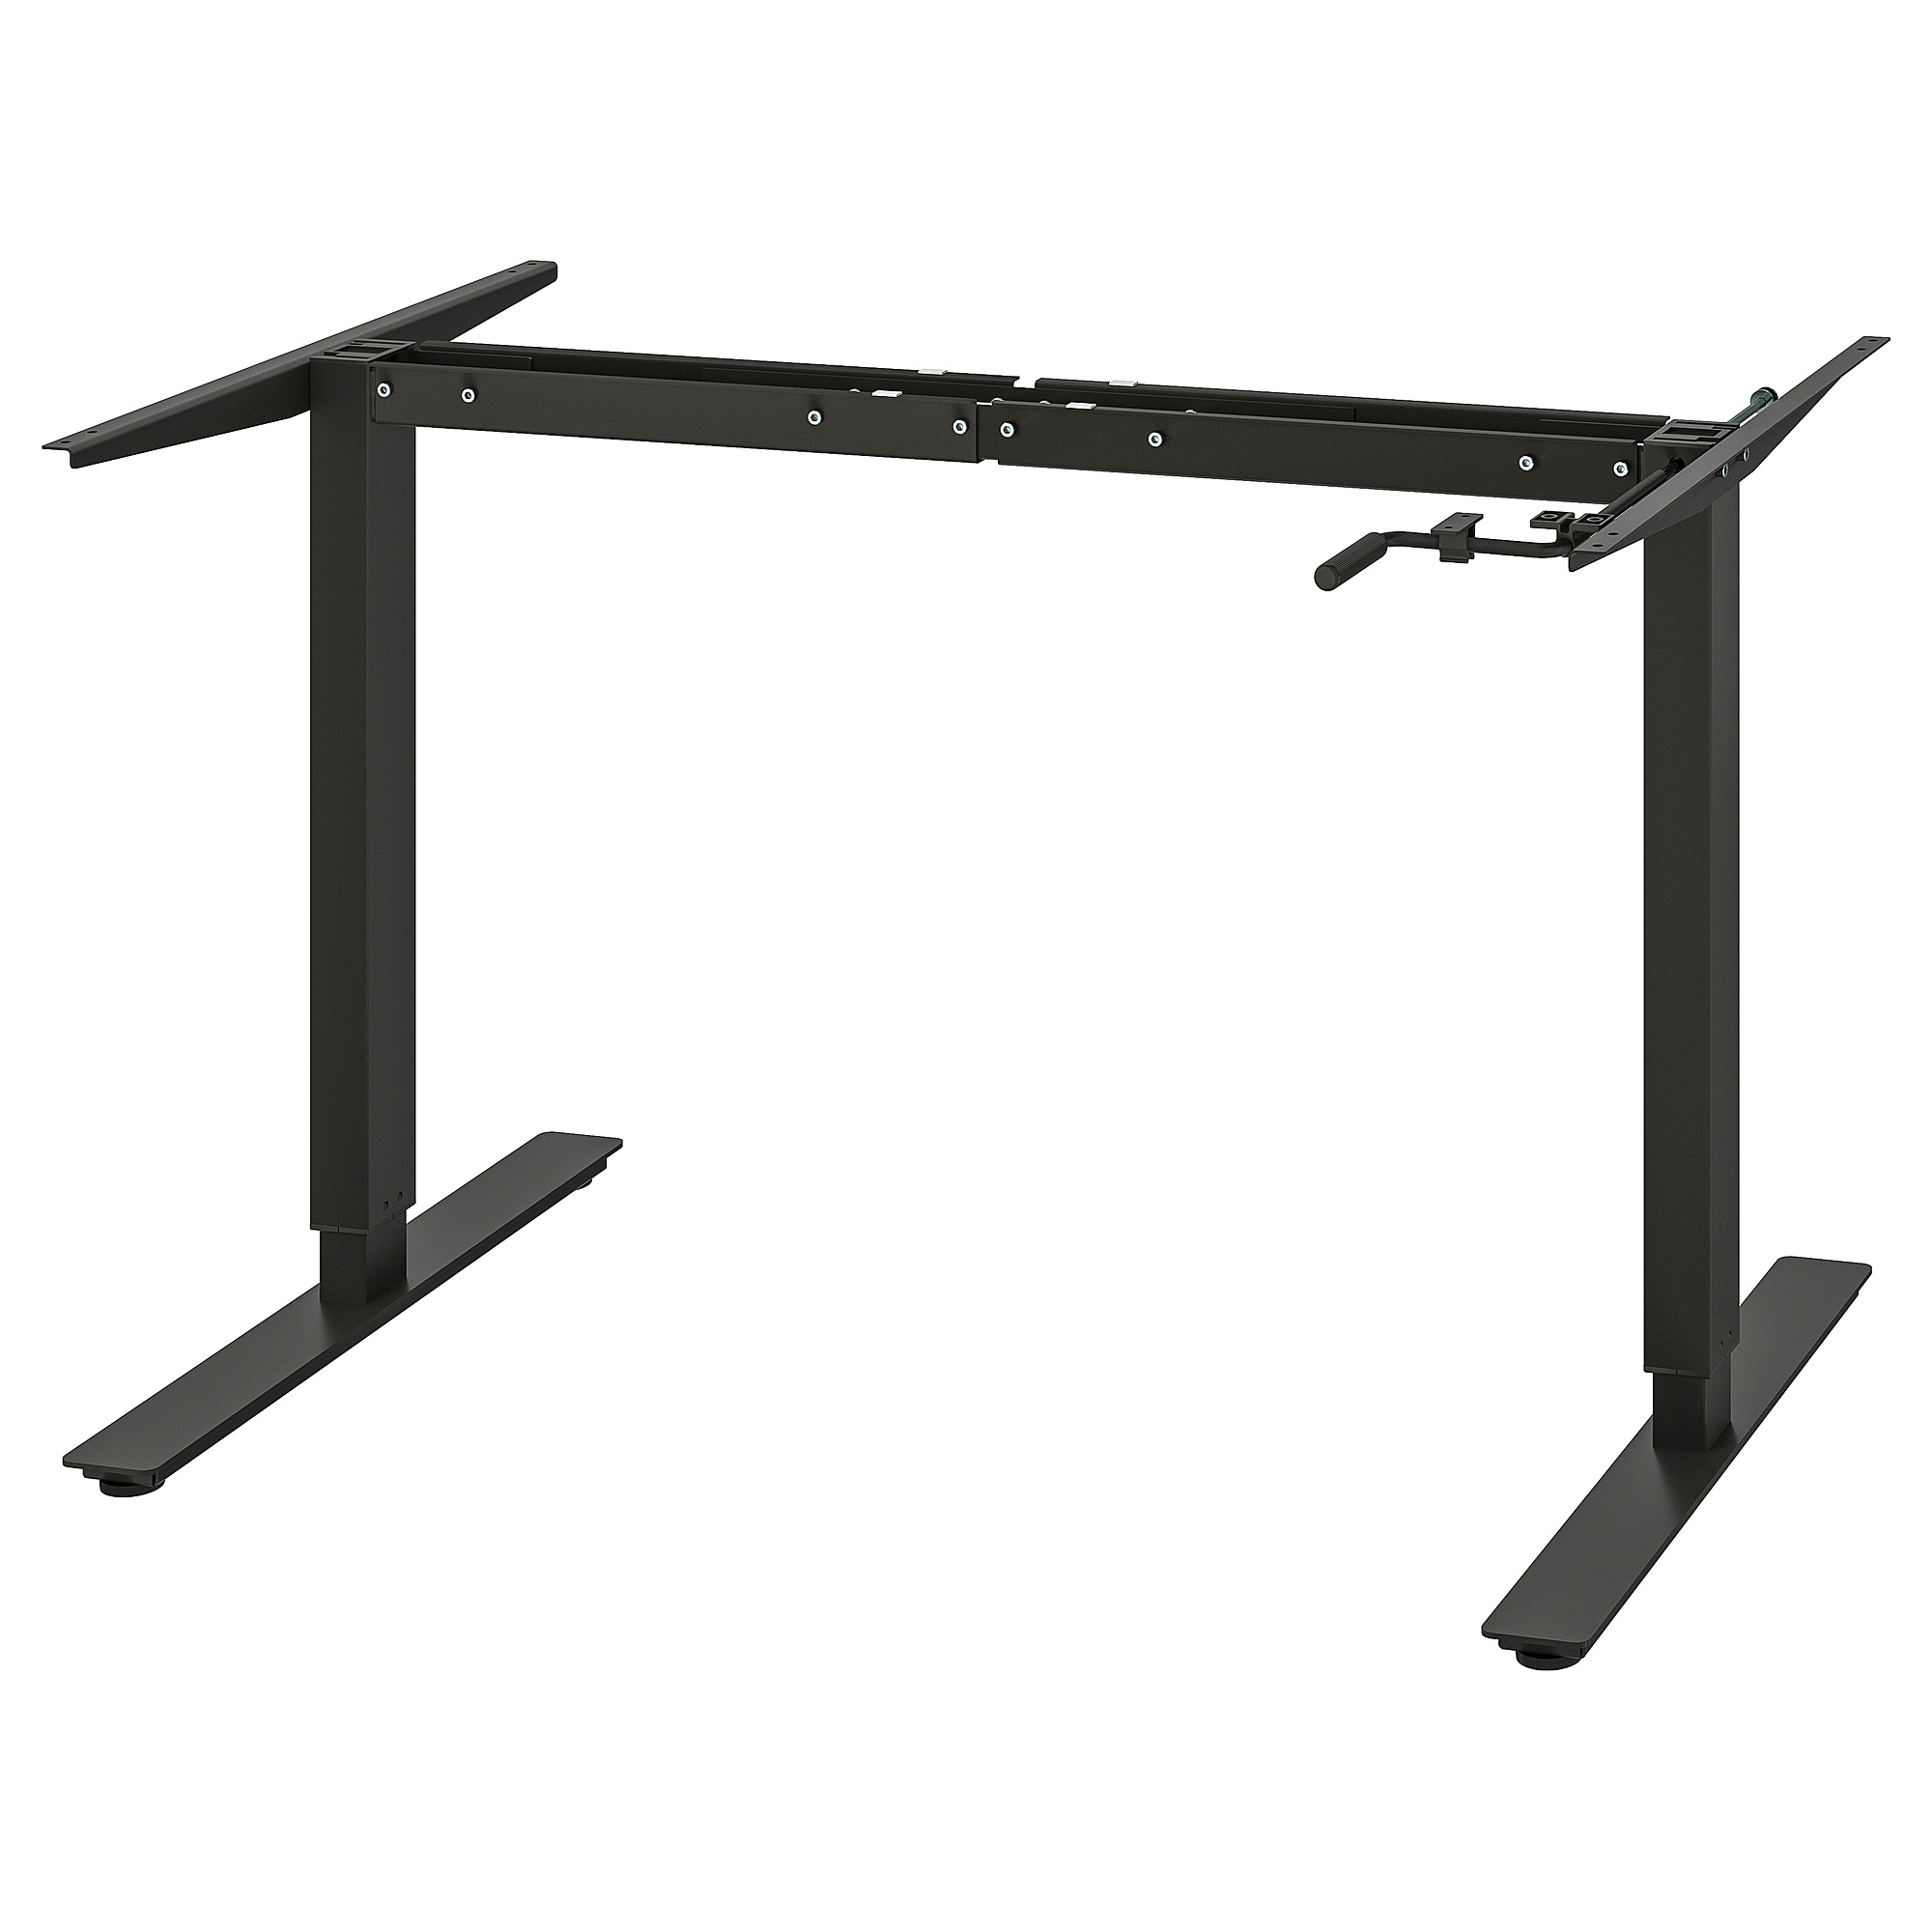 TROTTEN underframe sit/stand f table top